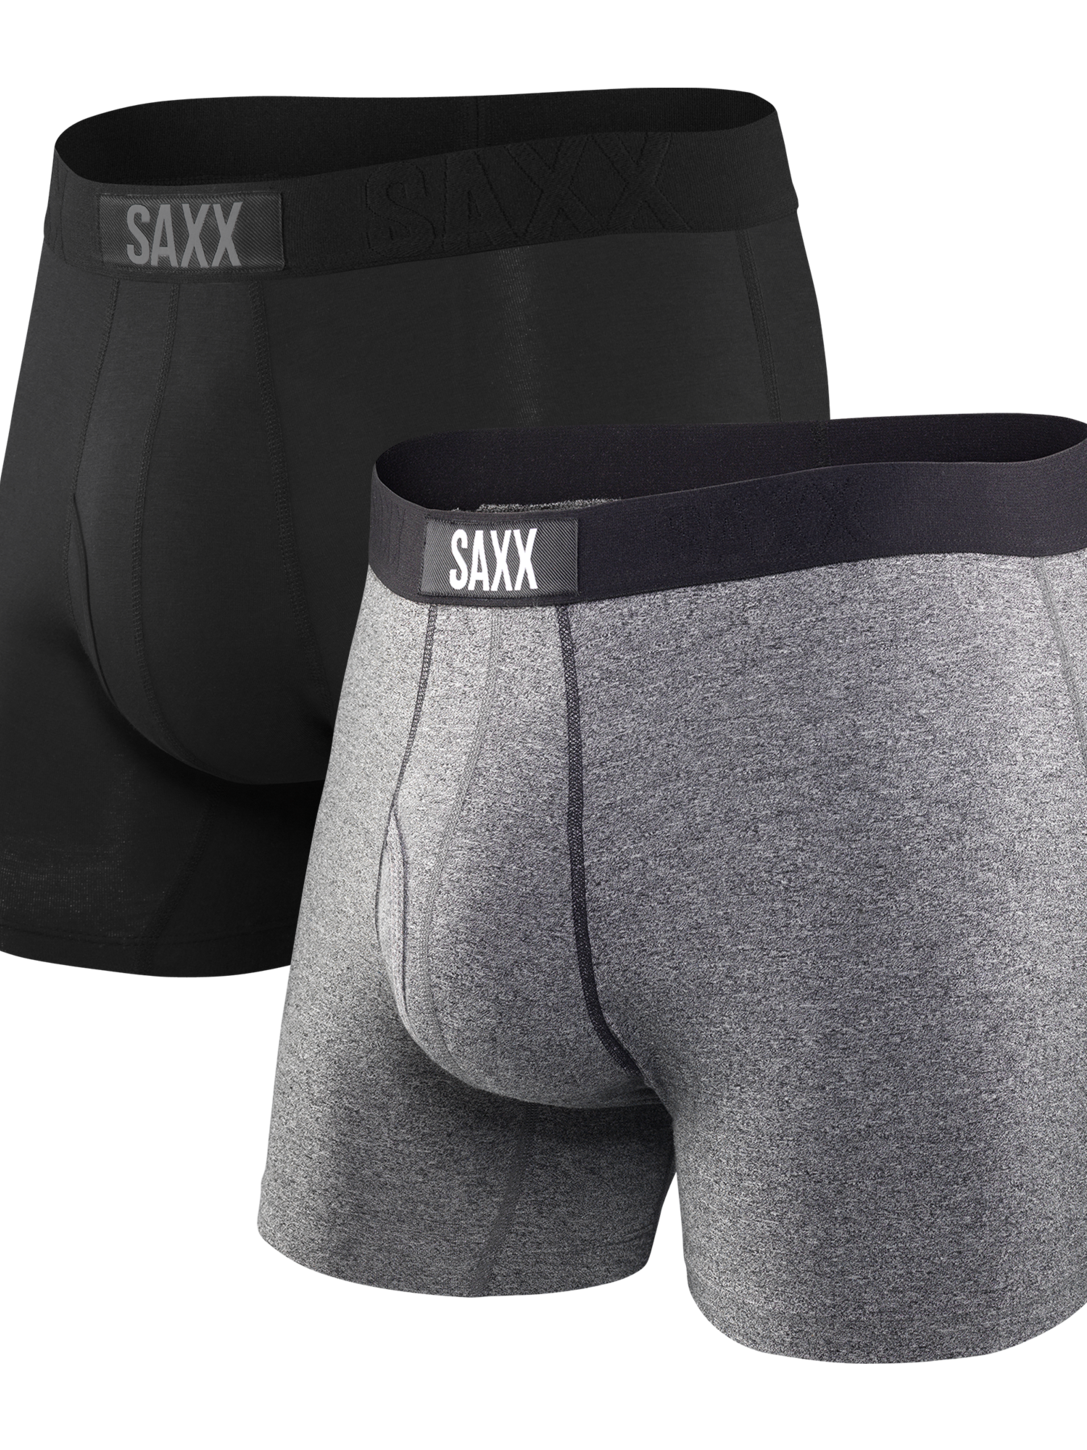 Saxx Ultra Boxers 2-pack - Black/Grey